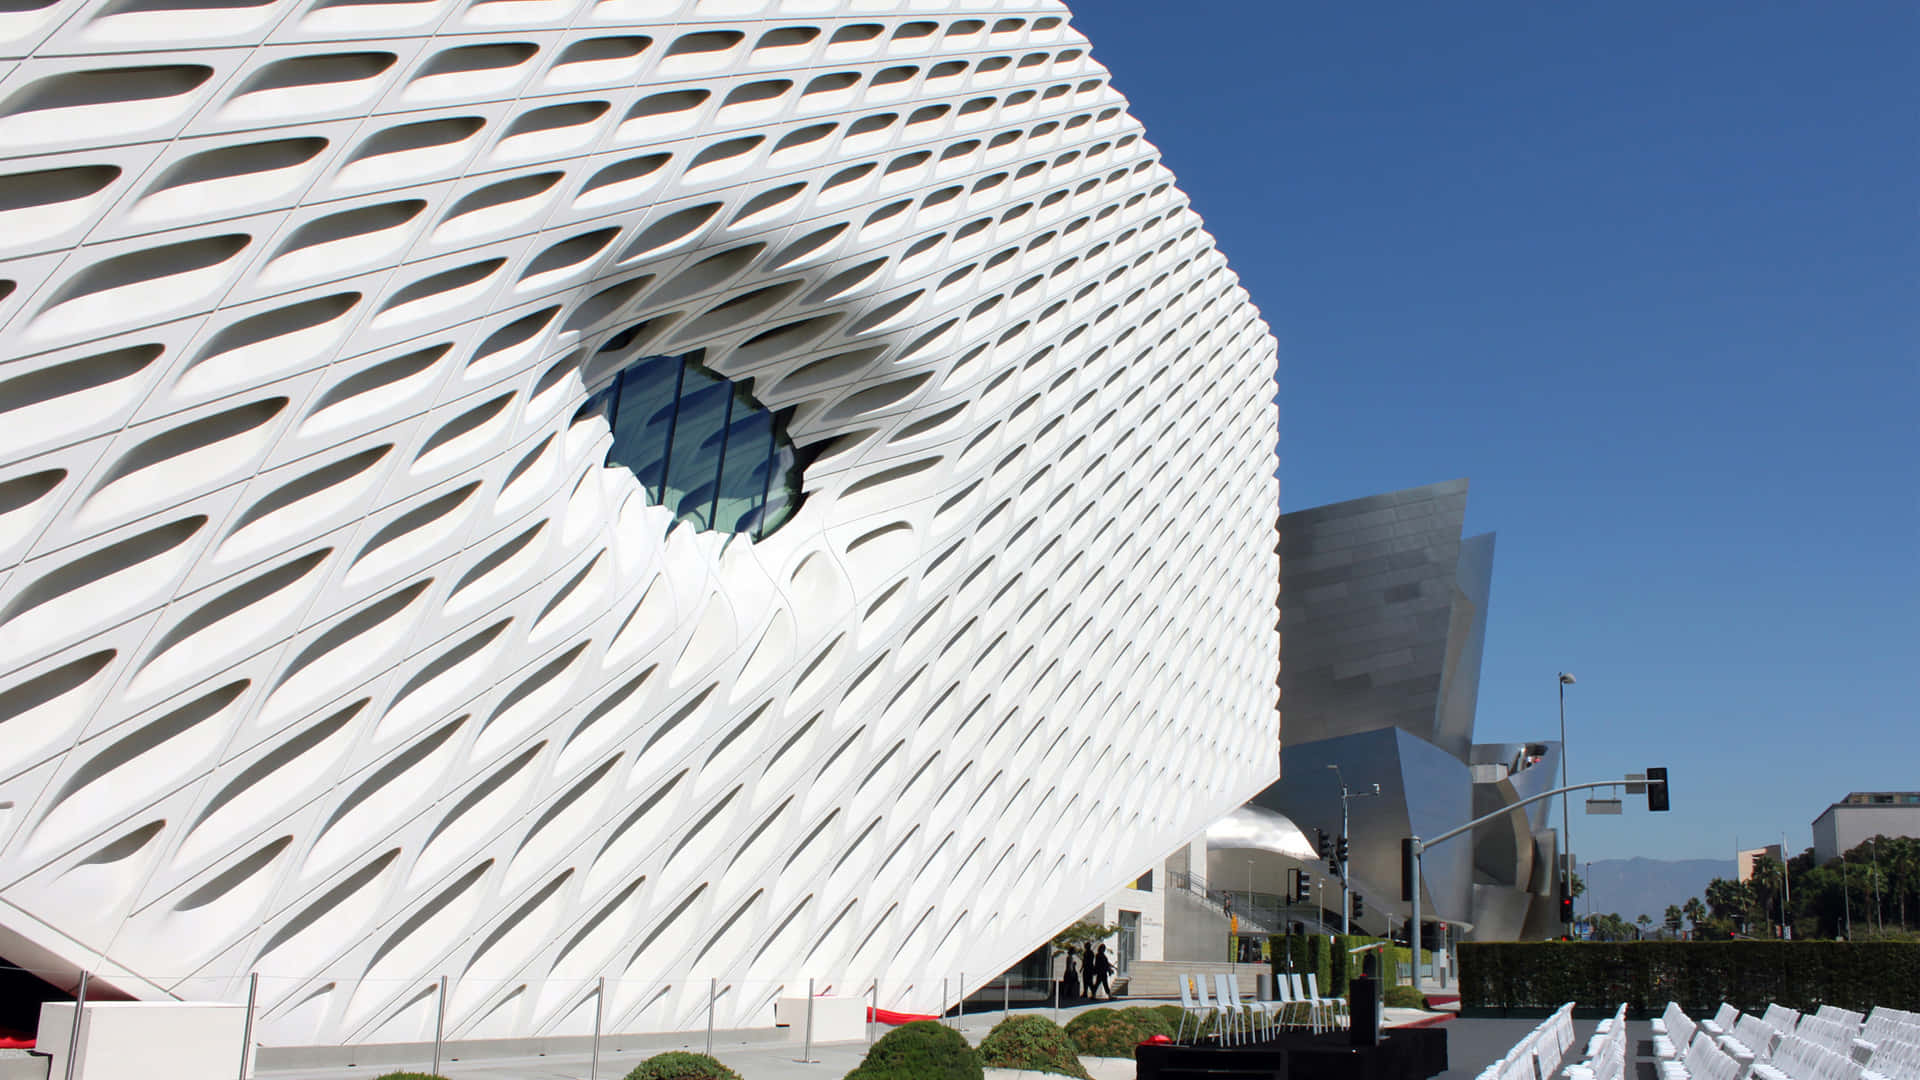 The Broad Museum Exterior Architecture Wallpaper